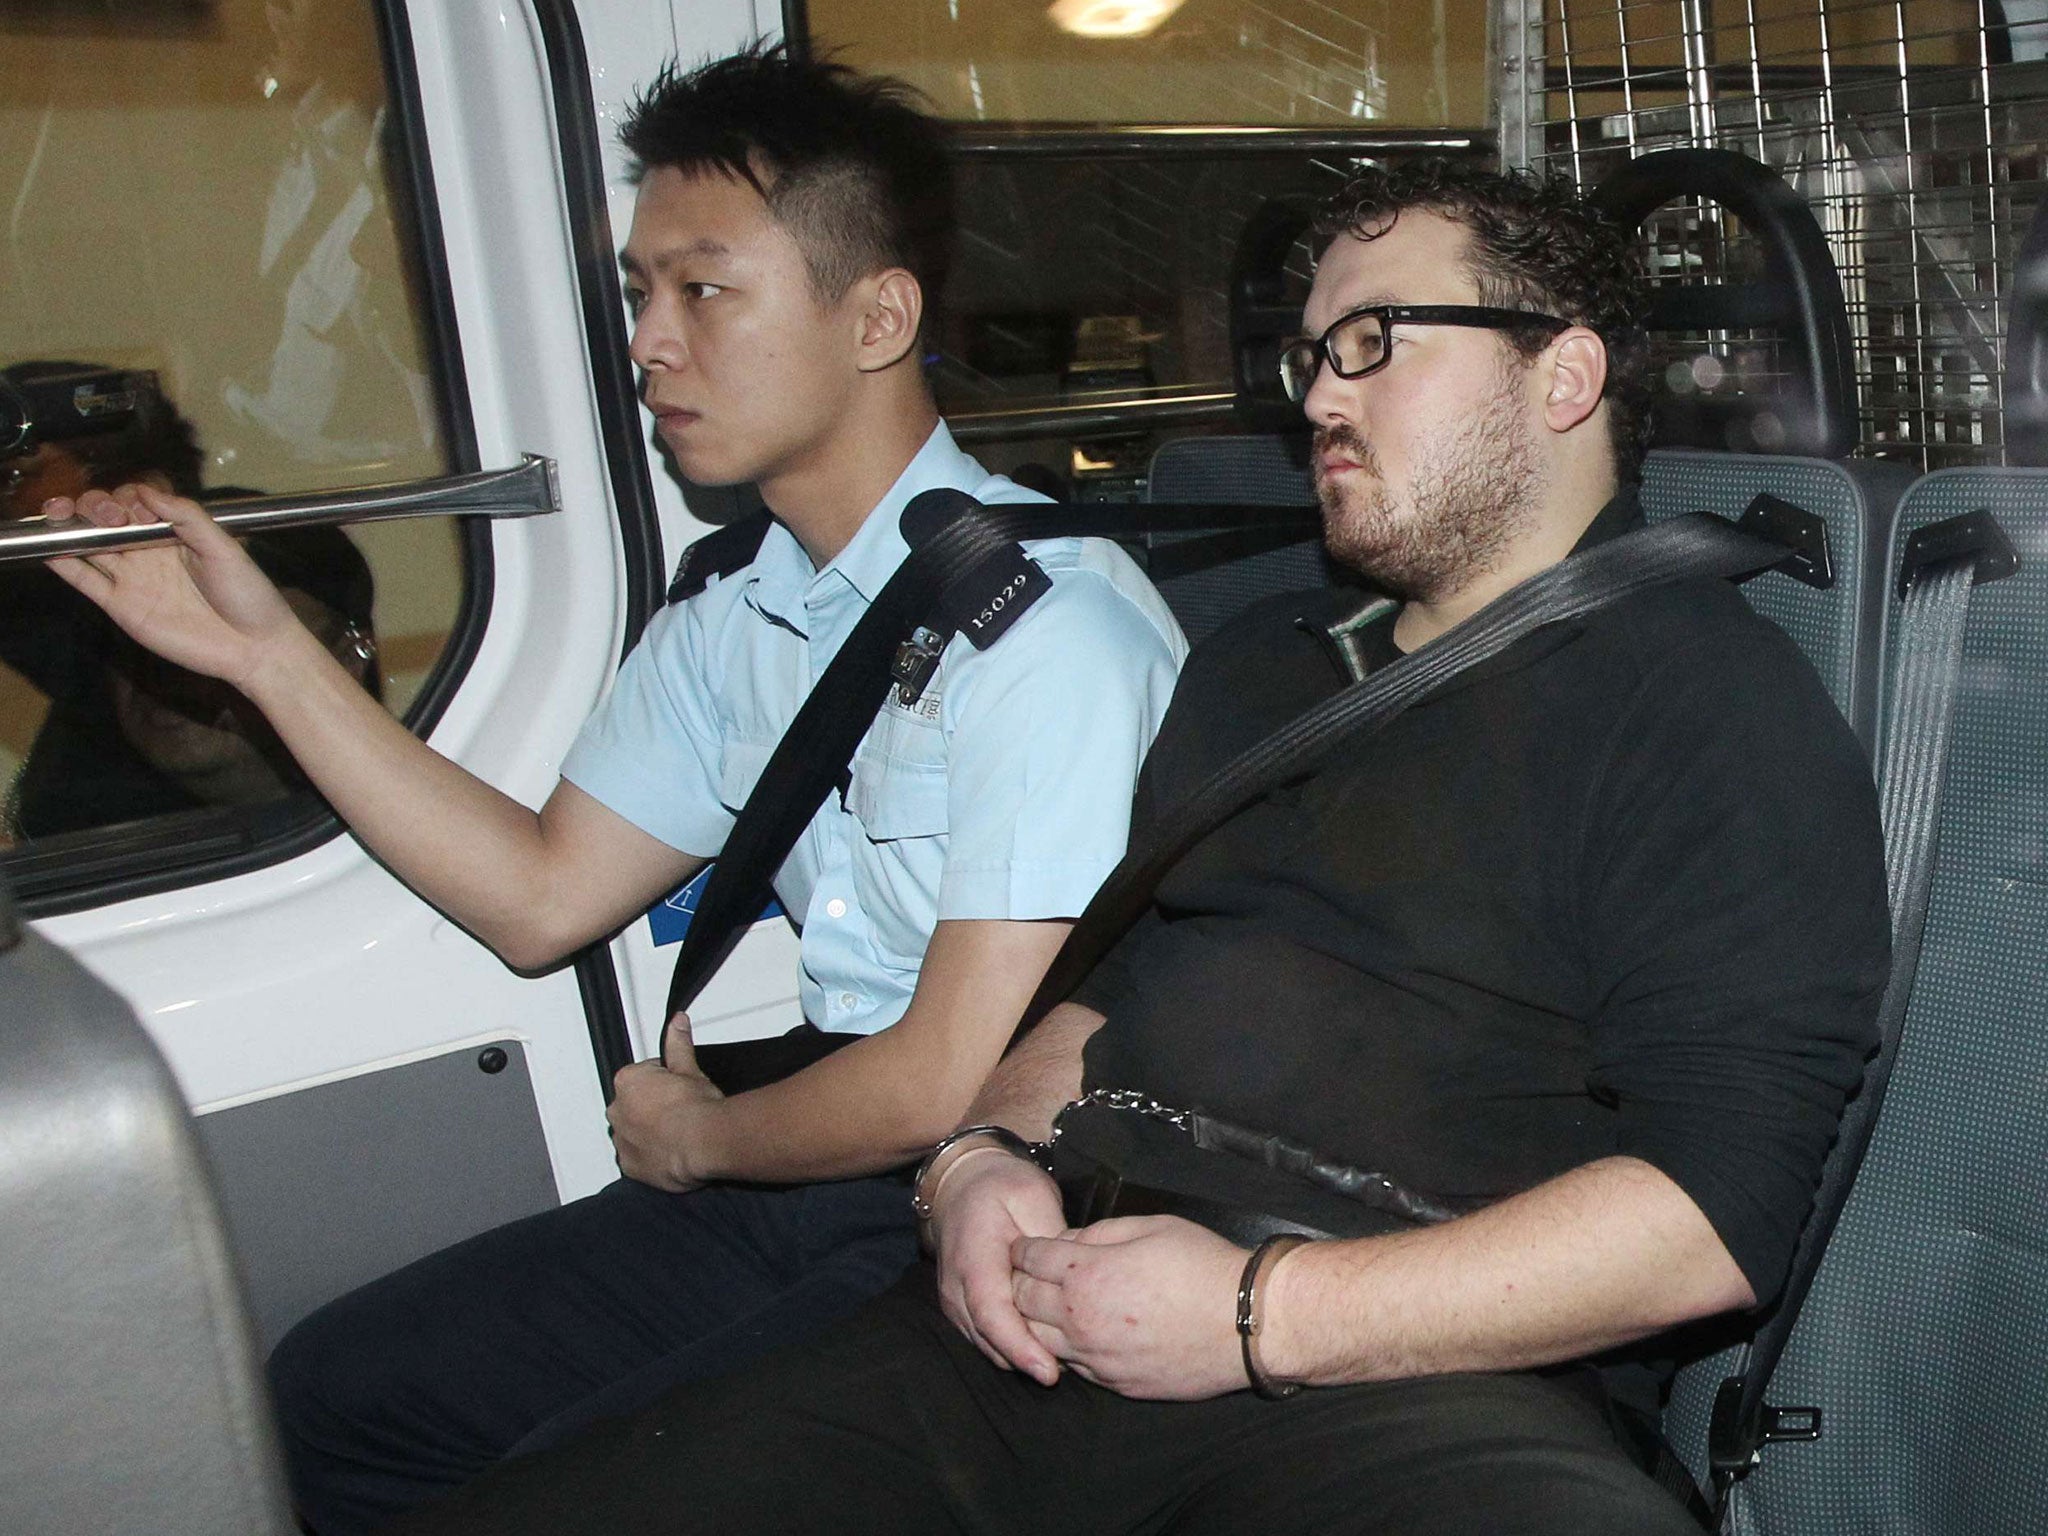 The British expatriate Rurik Jutting being taken to court in Hong Kong, where his lawyer suggested he may co-operate with police over the two murder charges he is facing